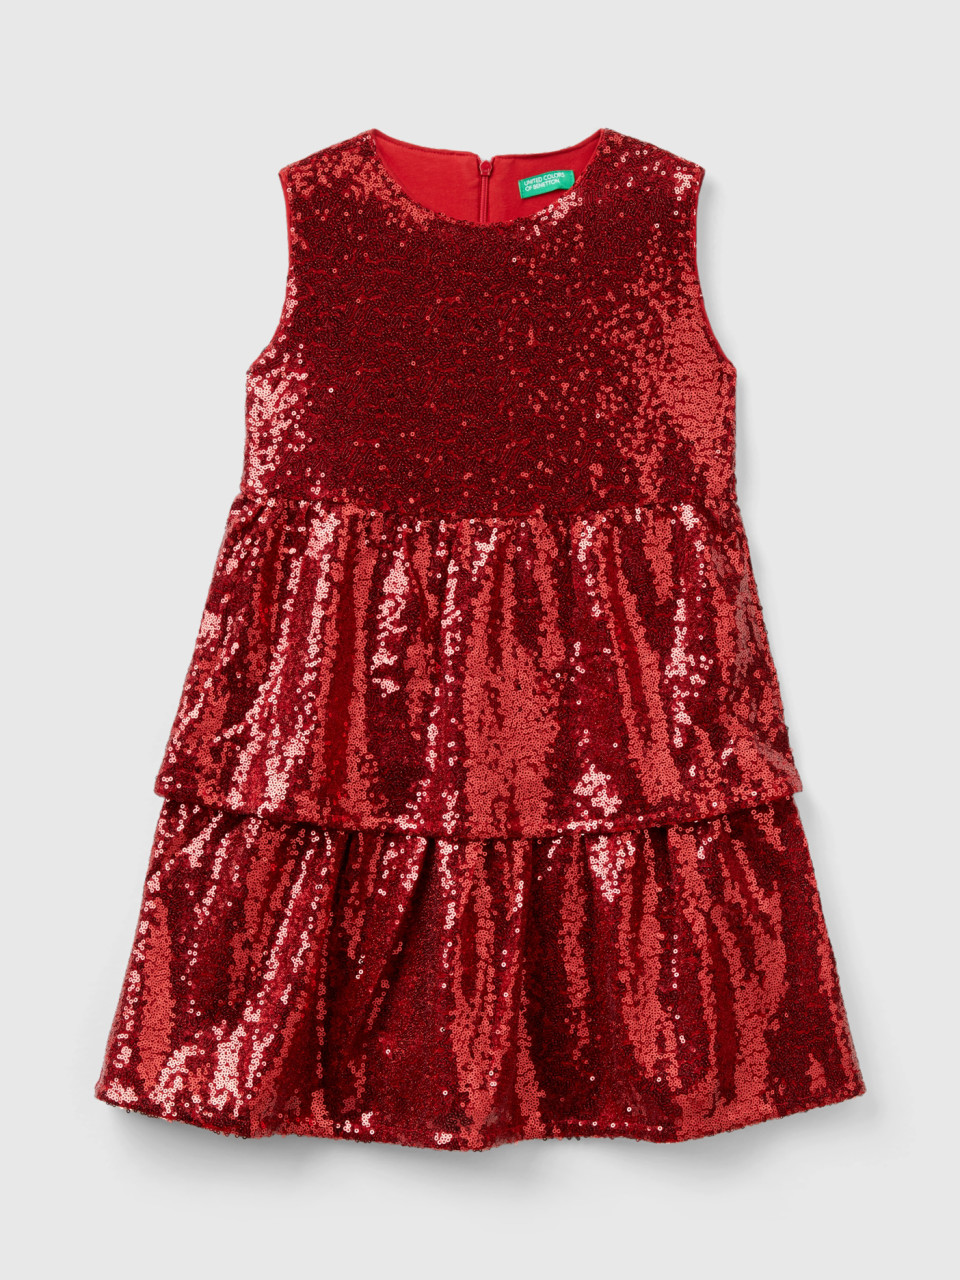 Benetton, Dress With Sequins, Red, Kids